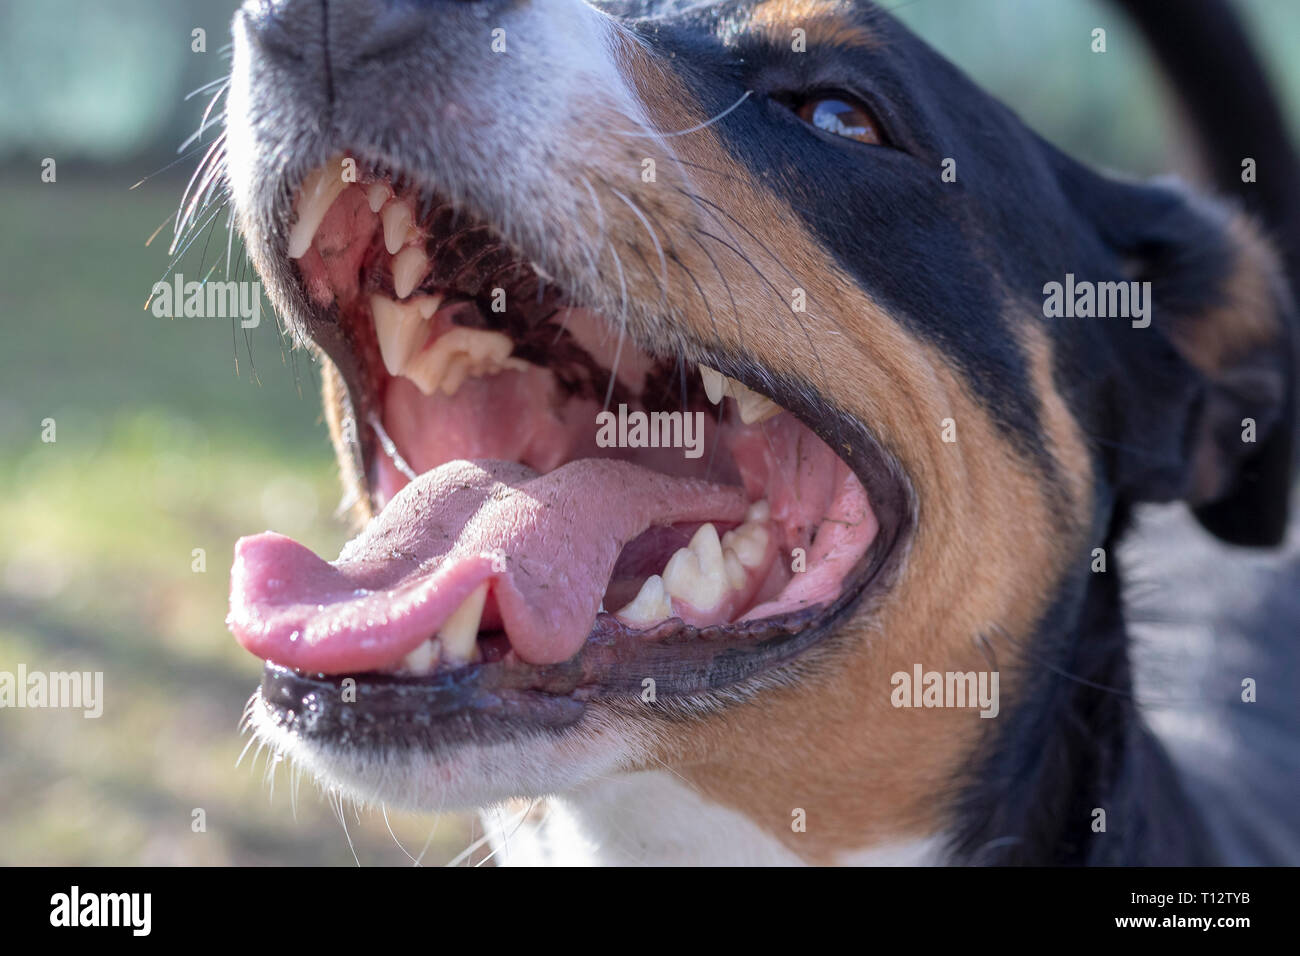 Open dog mouth showing tongue and teeth Stock Photo